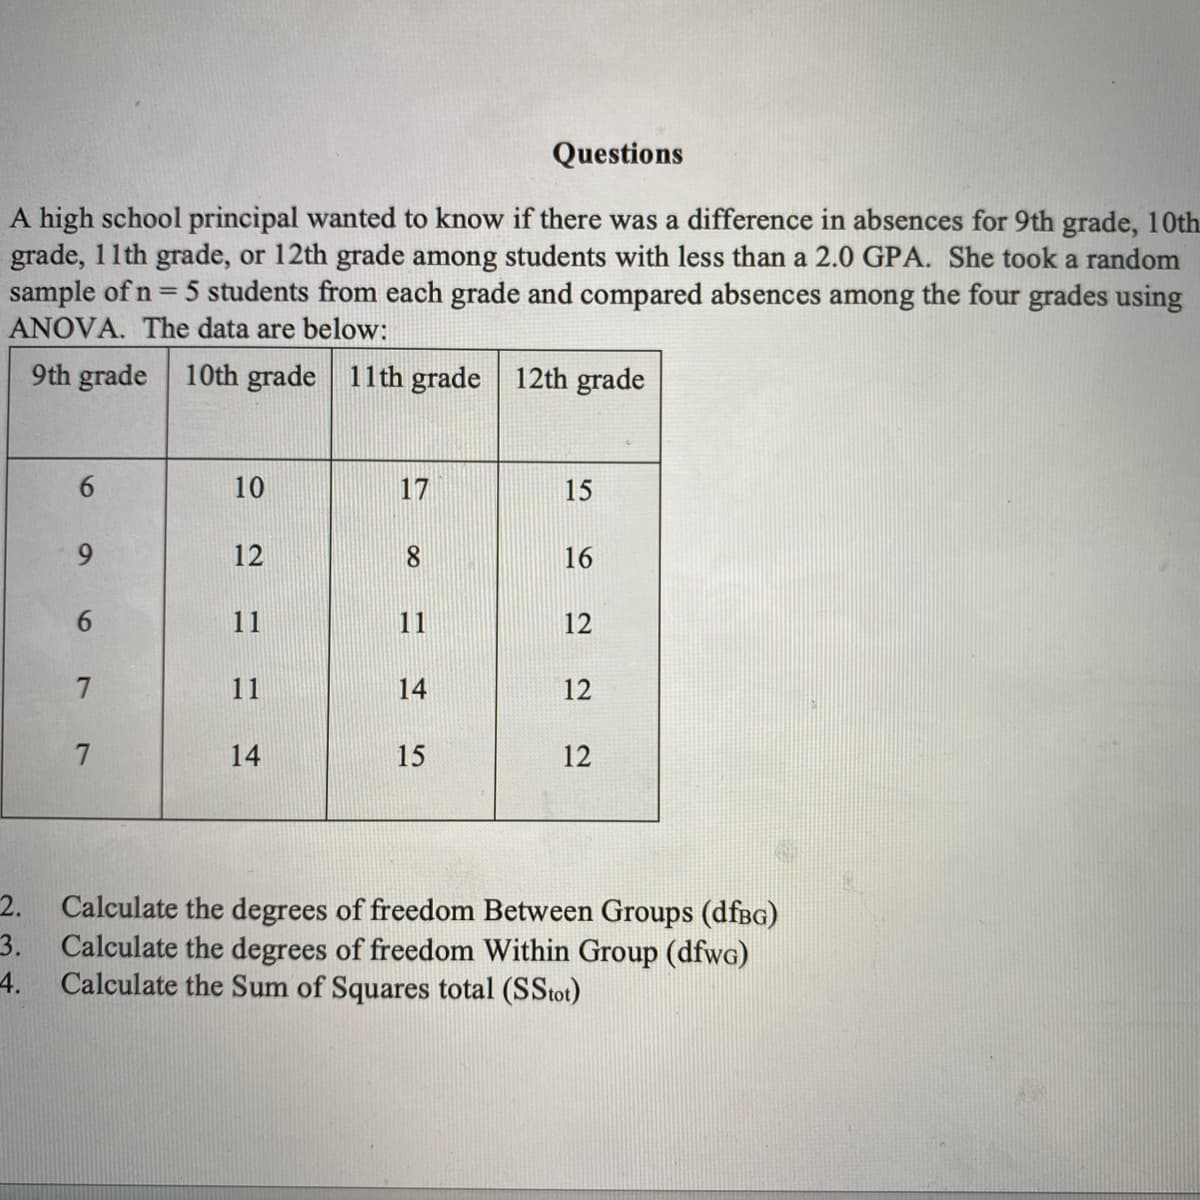 Questions
A high school principal wanted to know if there was a difference in absences for 9th grade, 10th
grade, 11th grade, or 12th grade among students with less than a 2.0 GPA. She took a random
sample of n = 5 students from each grade and compared absences among the four grades using
ANOVA. The data are below:
9th grade 10th grade 11th grade 12th grade
10
17
15
9.
12
8.
16
11
11
12
7.
11
14
12
7
14
15
12
2. Calculate the degrees of freedom Between Groups (dfBG)
3. Calculate the degrees of freedom Within Group (dfwc)
4.
Calculate the Sum of Squares total (SStot)
6
6
